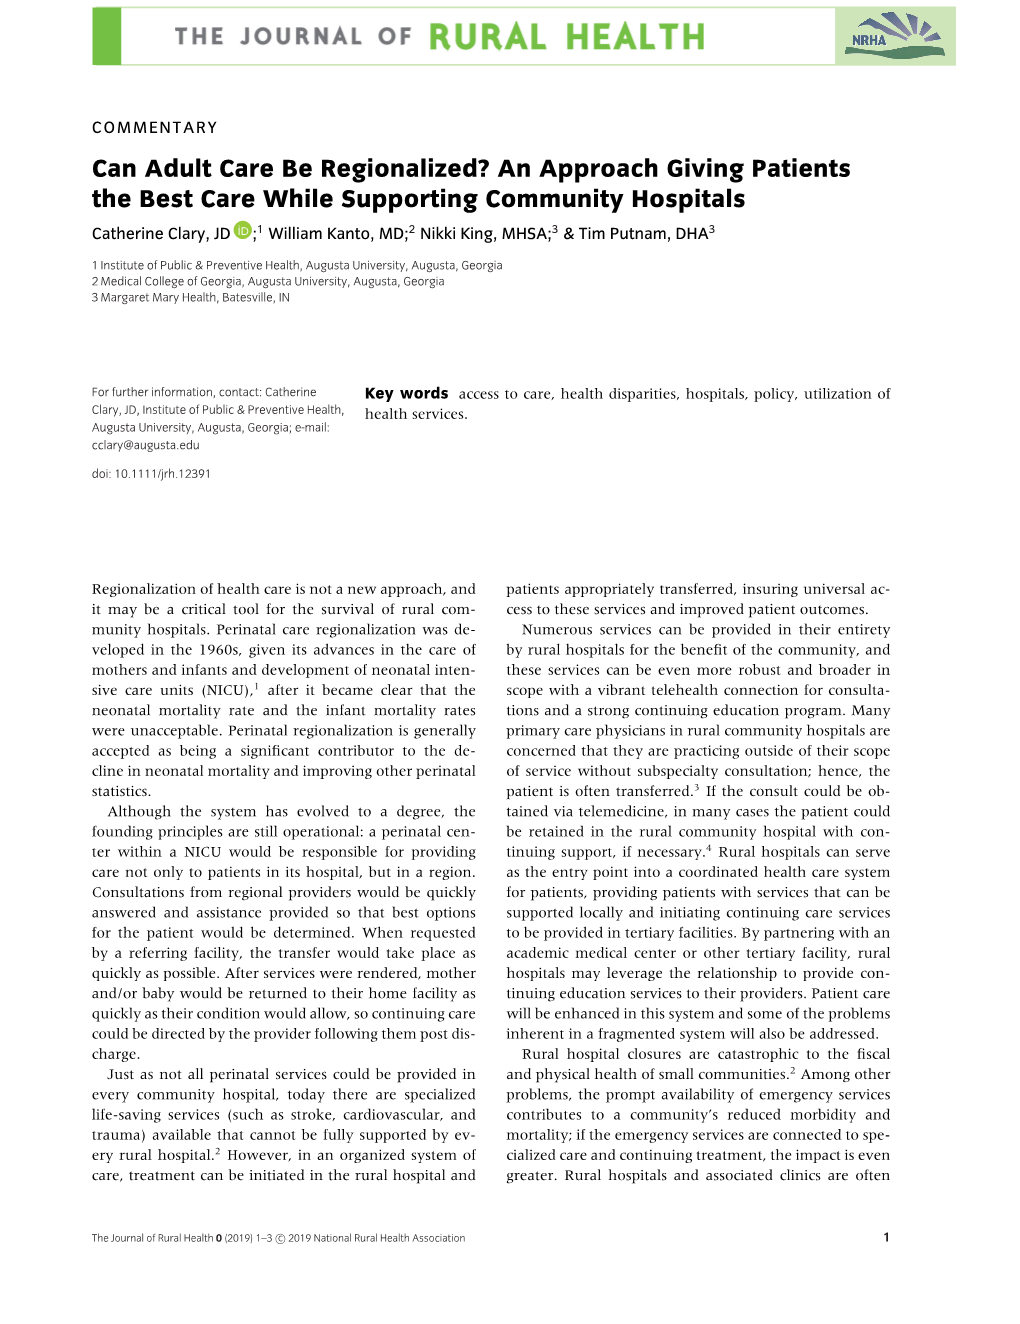 Can Adult Care Be Regionalized&#X0003f; an Approach Giving Patients the Best Care While Supporting Community Hospitals